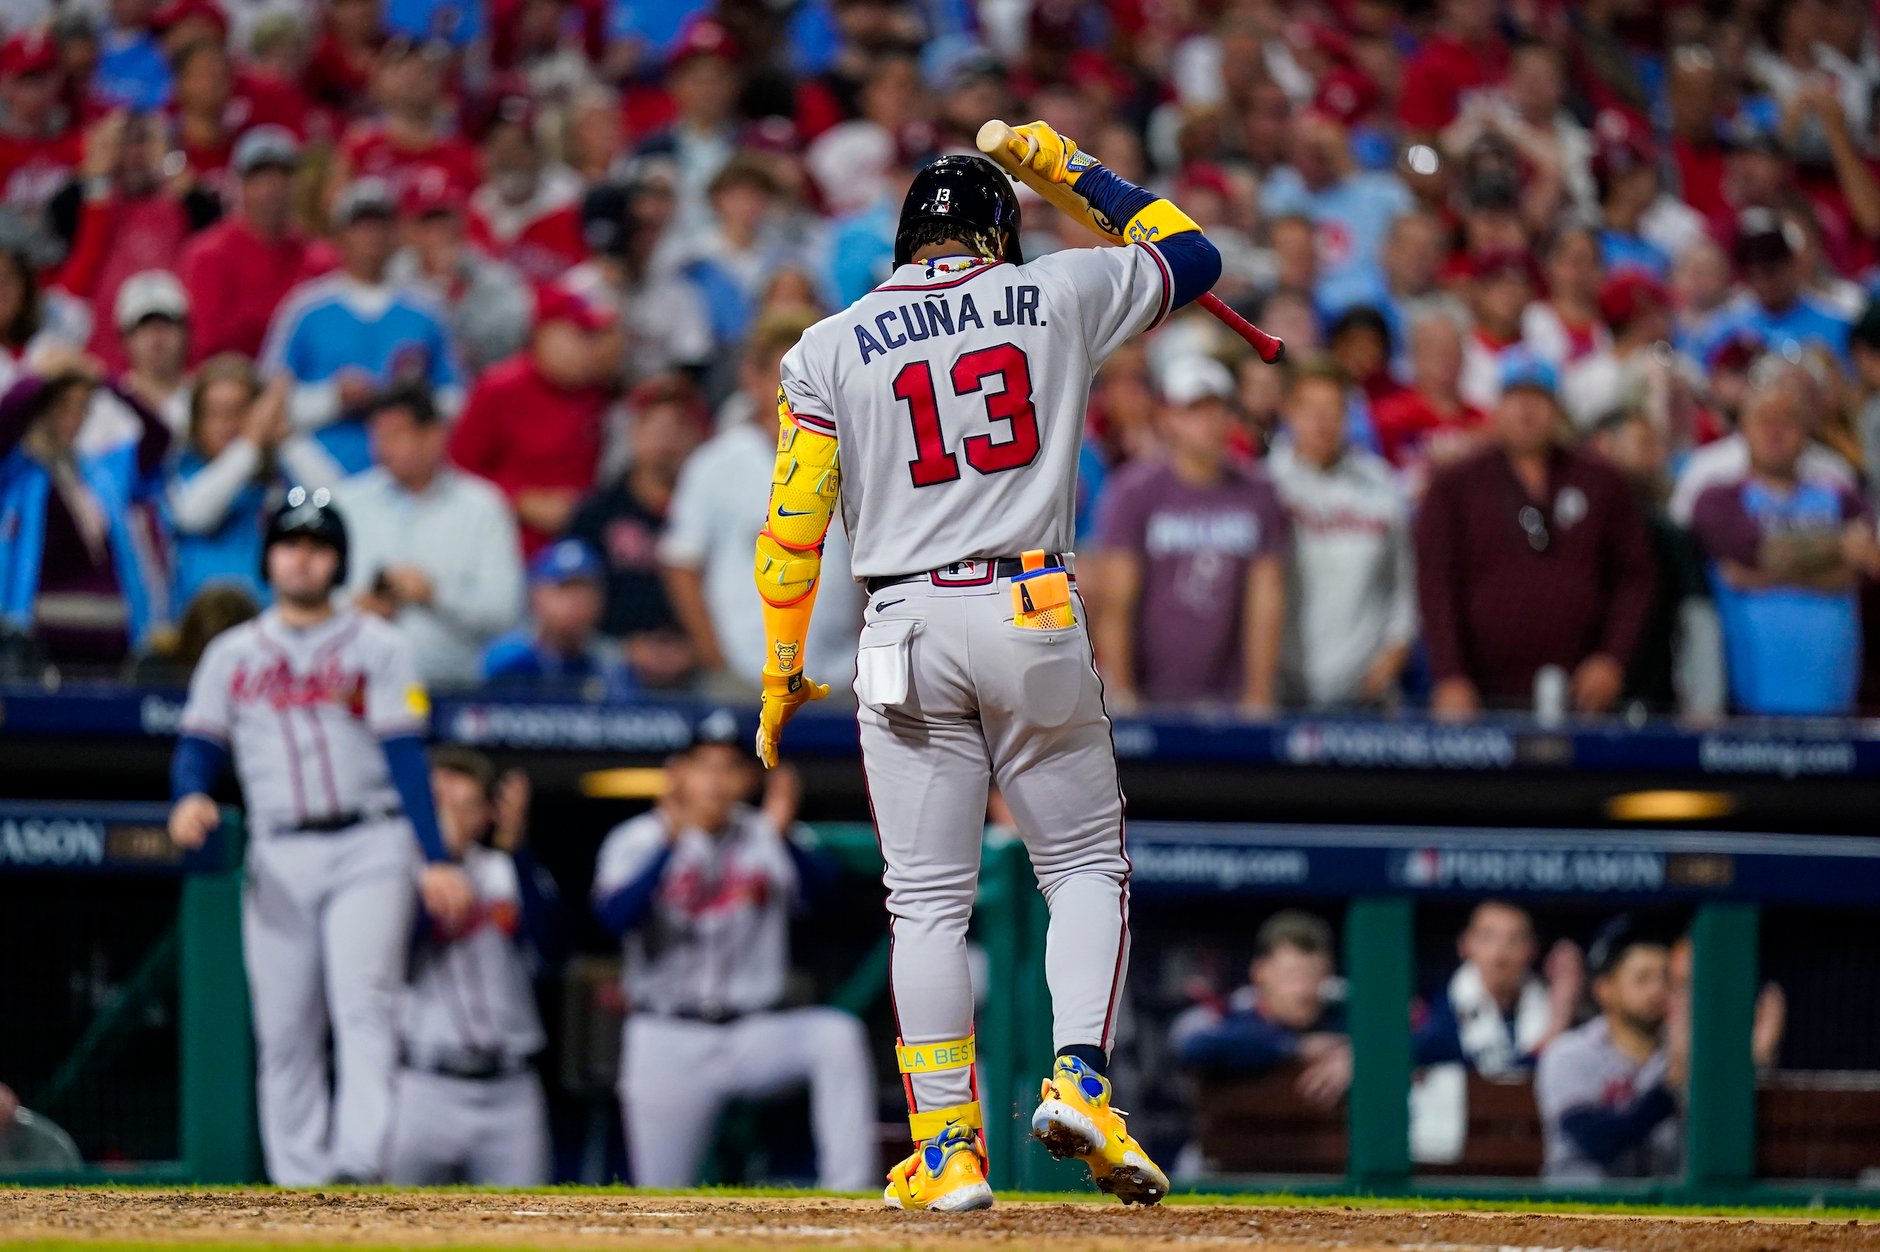 The 2020s are starting to feel like the 1990s for the Braves after